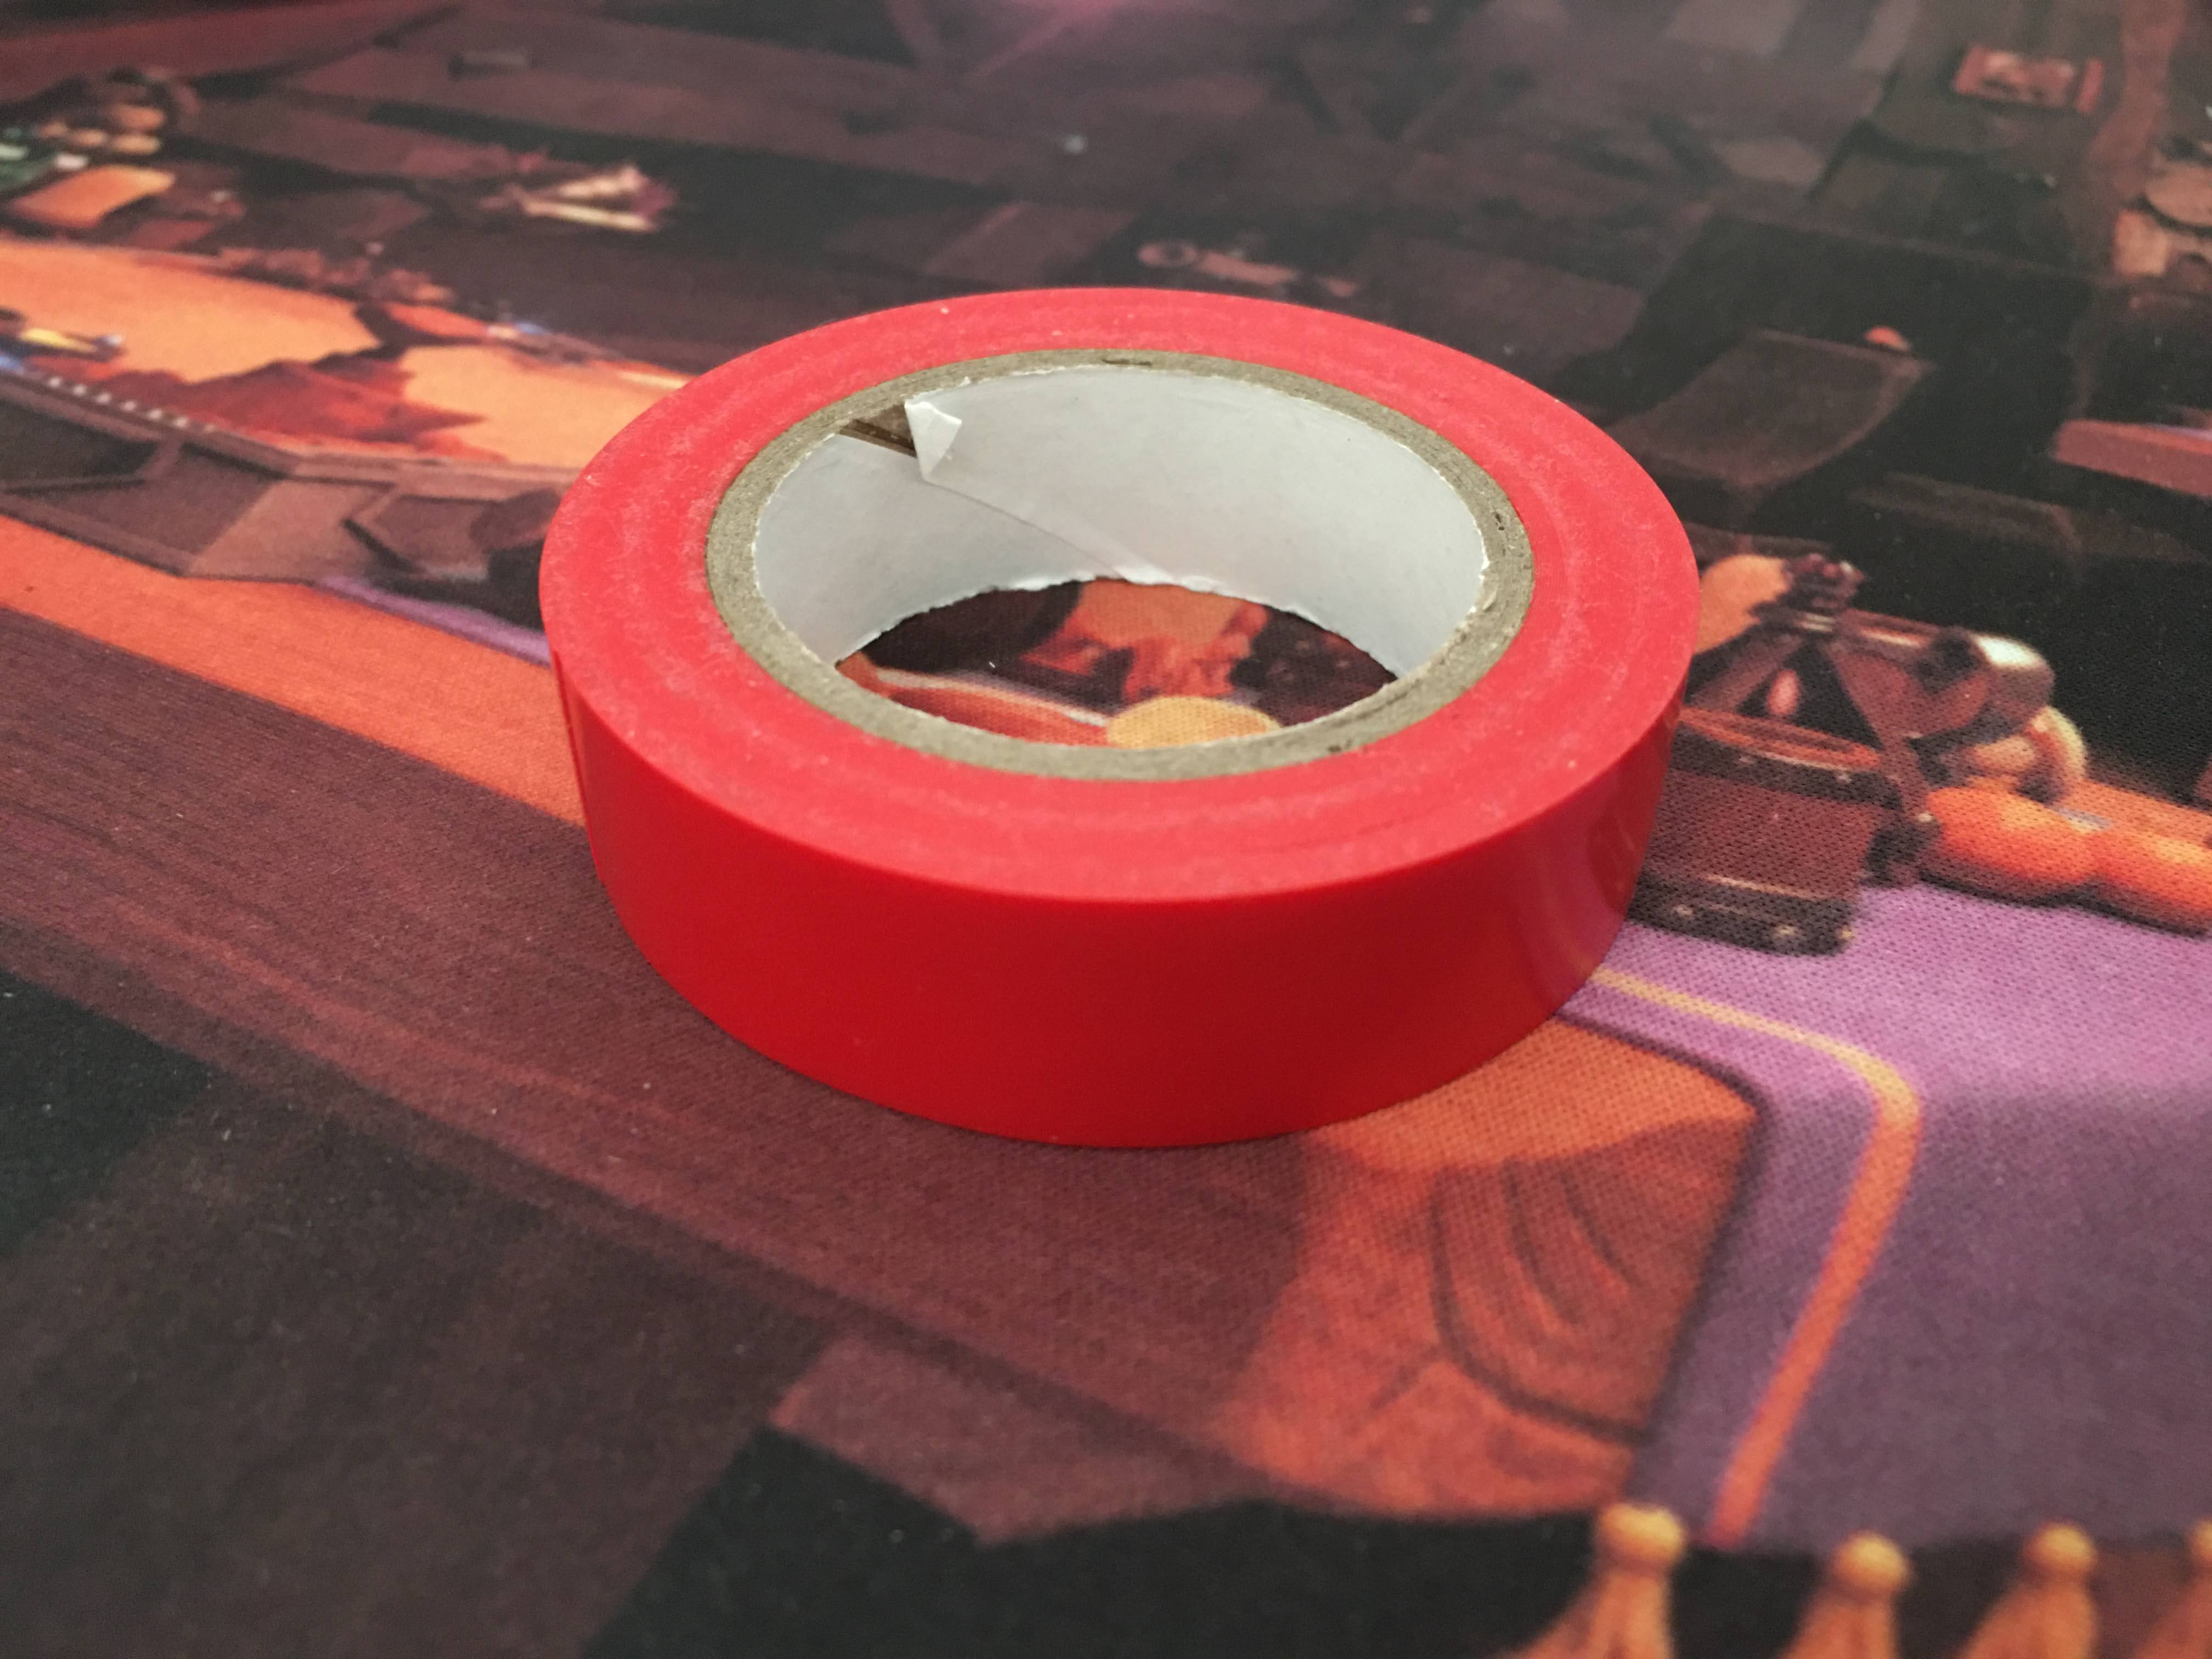 A roll of Electrical tape